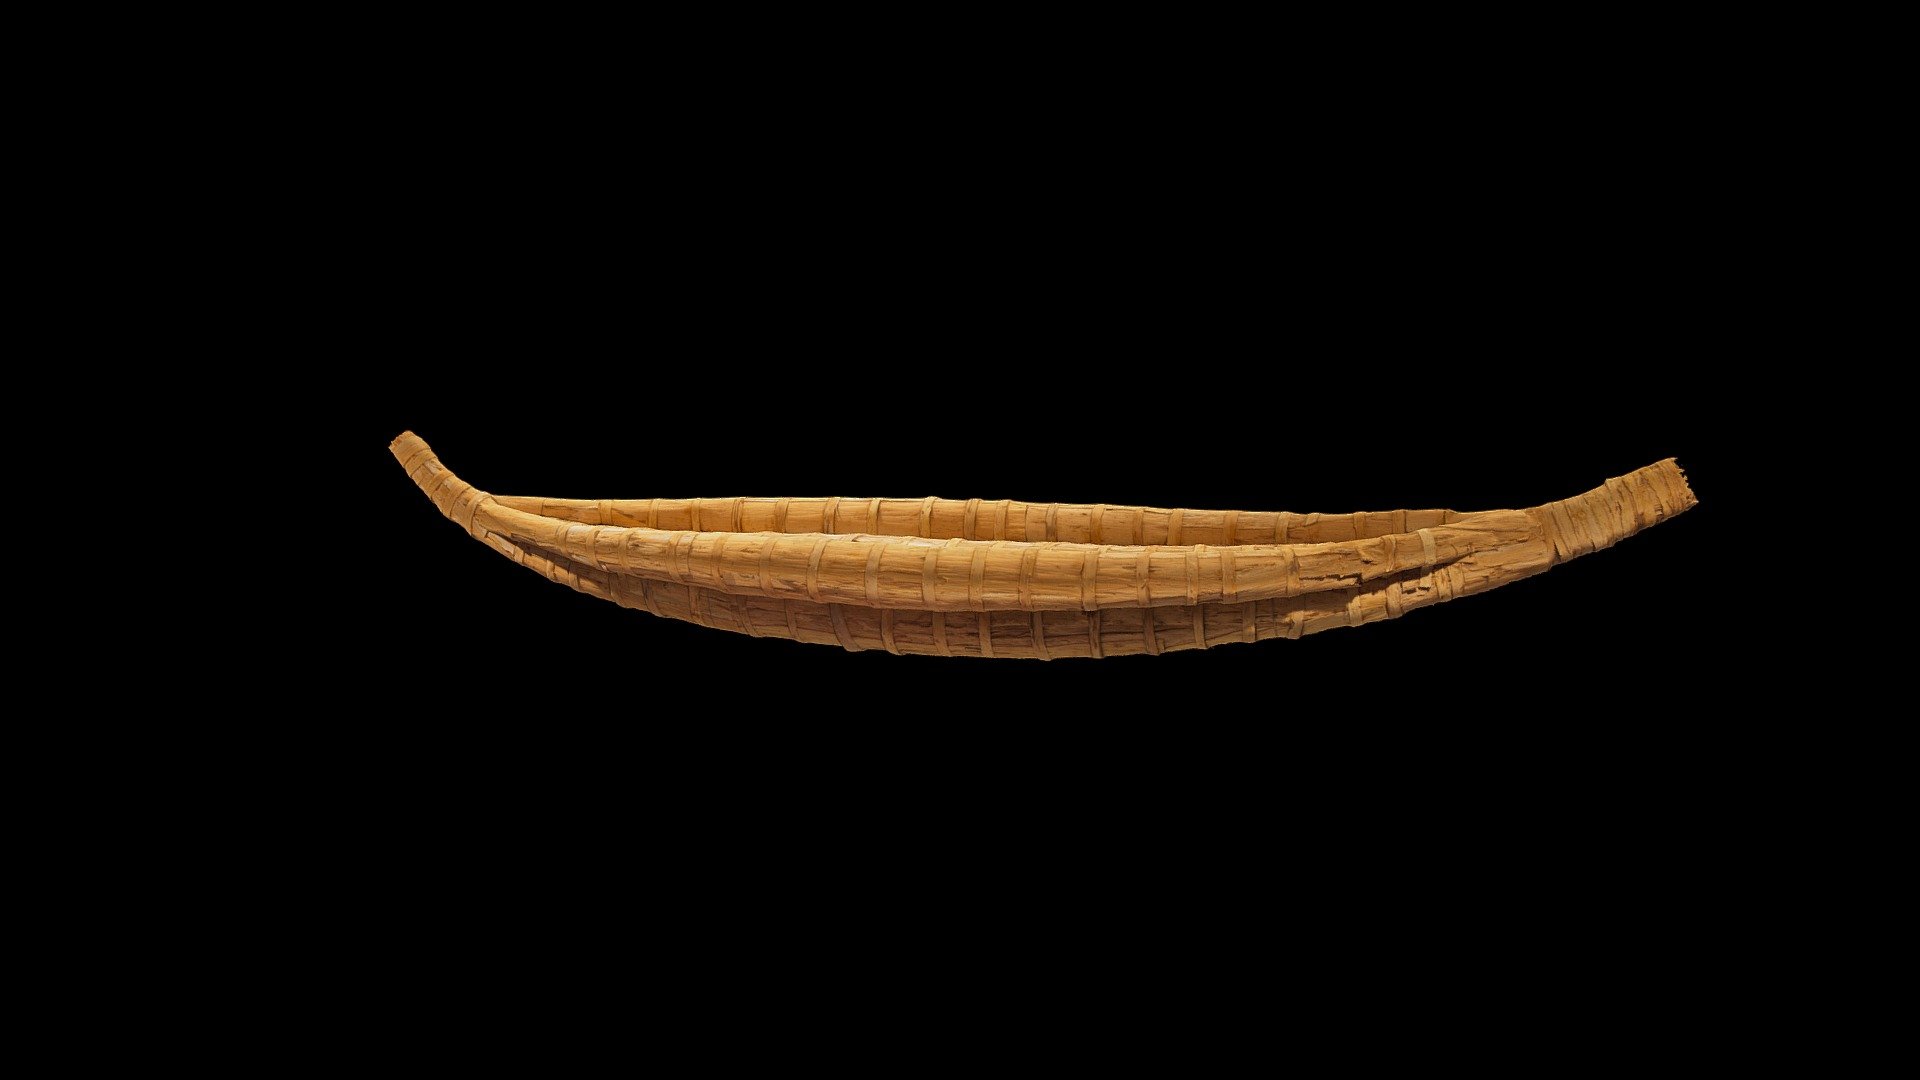 Rex Greeno (b.1942), Canoe, 2013, paperbark, tea tree, string, glue. UT2019/129. Fine Art Collection, University of Tasmania. © Courtesy of the artist. 

Rex Greeno was born on Flinders Island in Bass Strait. His Aboriginal heritage comes from his mother, Dulcie Greeno, a noted shell necklace maker, and his grandfather, Silas Mansell, who taught him mutton-birding, kangaroo and wallaby-snaring, and how to make boats. After retiring from 40 years as a professional fisherman, Greeno used his knowledge of the sea to resurrect the art of traditional canoe construction, which had not been seen in Tasmania since the early 19th century. Greeno taught himself the craft by reading extensively and by experimenting with collecting and processing various raw materials and ways of constructing the canoes.


3D: Michael Roach, Senior Lecturer, Earth Sciences, UTAS. Assistance from Office of the PVC Aboriginal Leadership, College of Science and Engineering, and Digital Futures. Documented at the Plimsoll Gallery 3d model